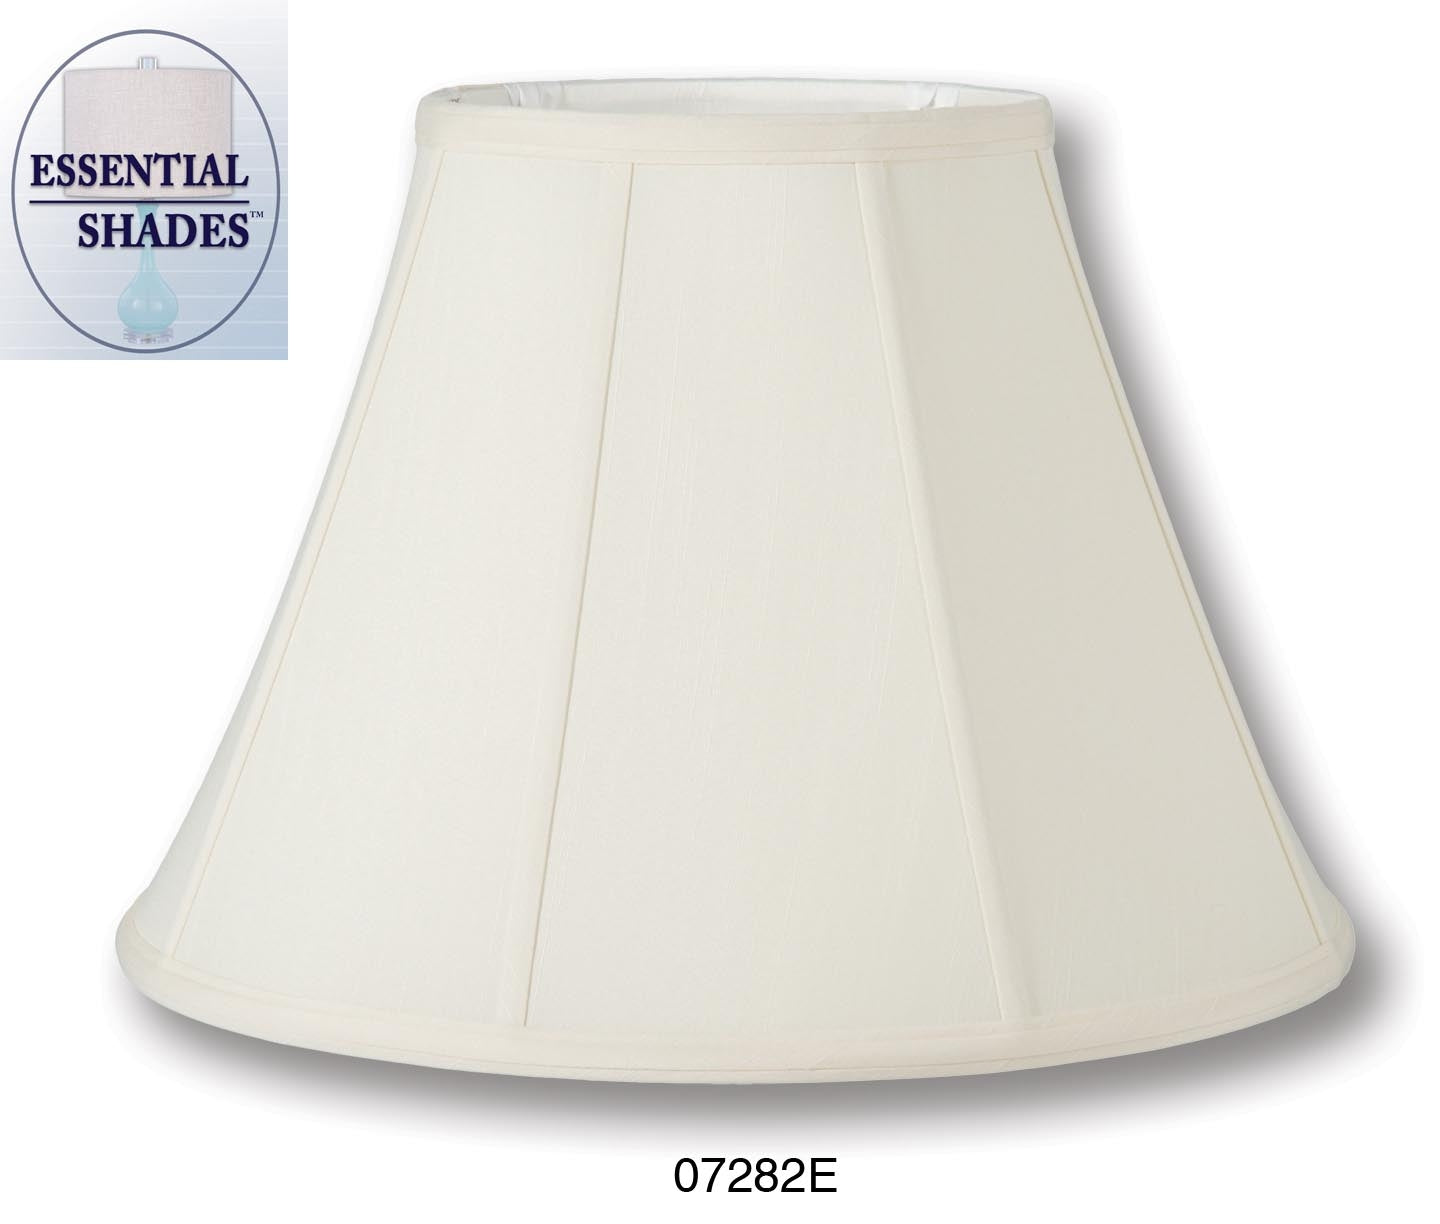 Essential Shades Brand Basic Empire, Value Lamp Shades - Choice of Color